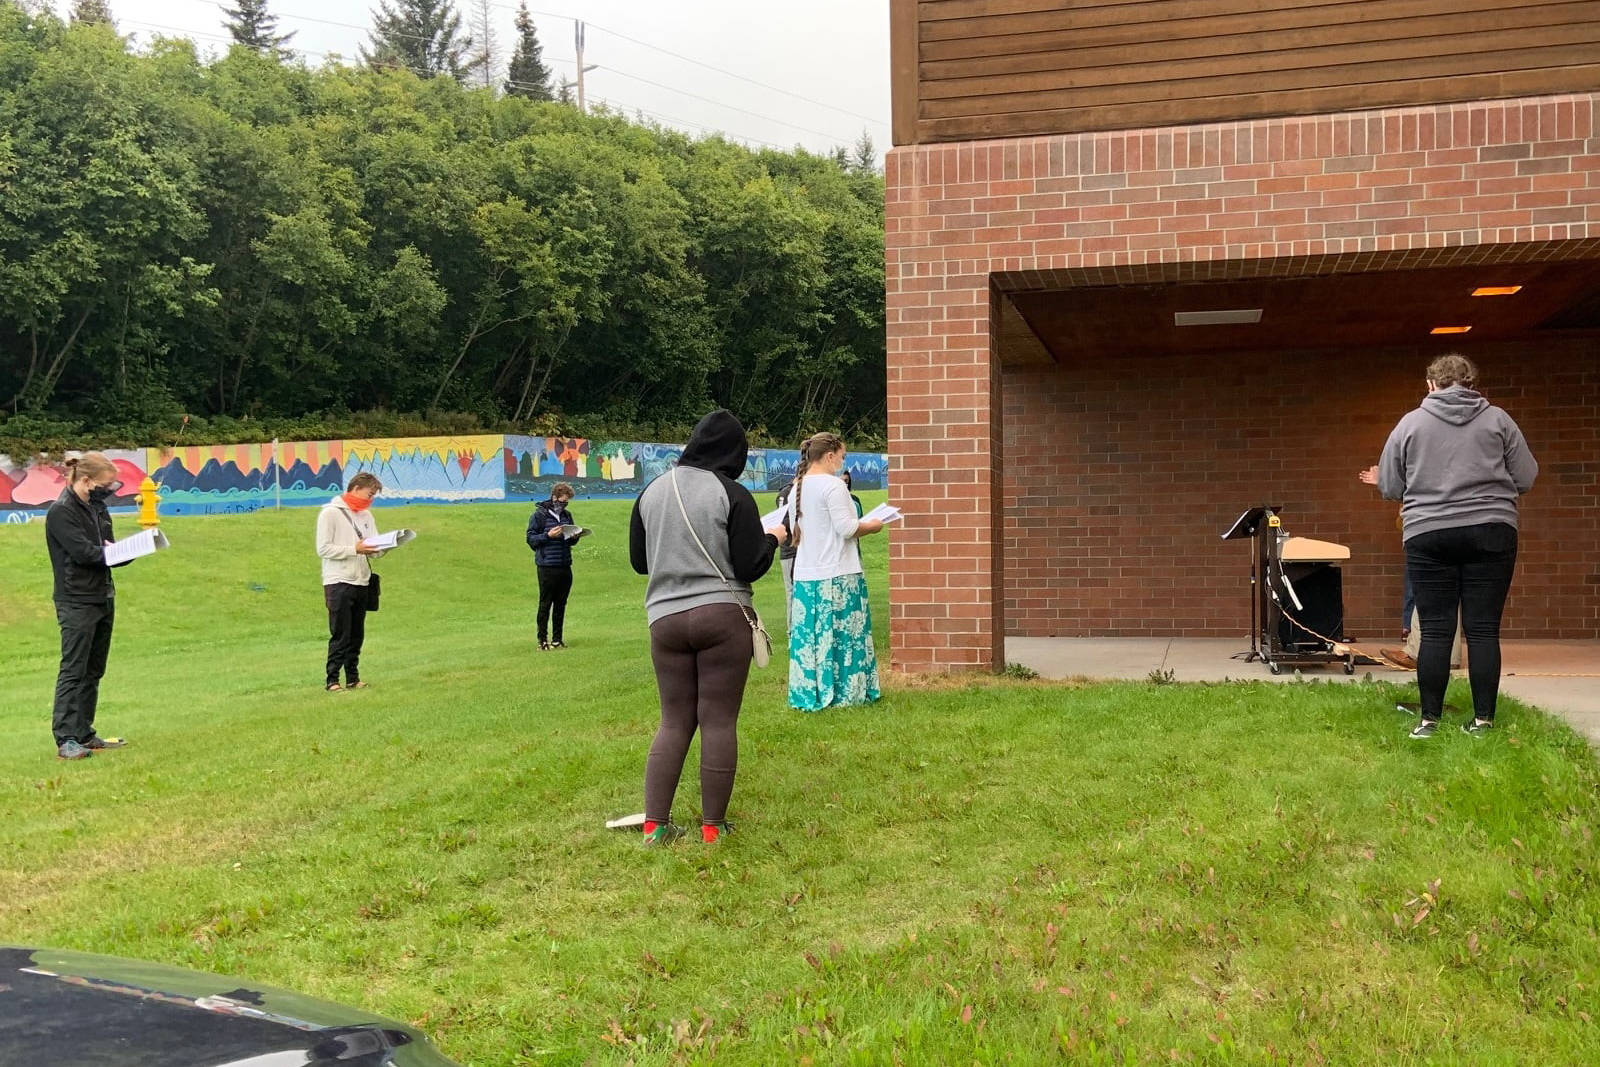 Members of the Homer Swing Choir practice outdoors on the first day of school, Monday, Aug. 24, 2020 at Homer High School in Homer, Alaska. (Photo courtesy Homer High School)